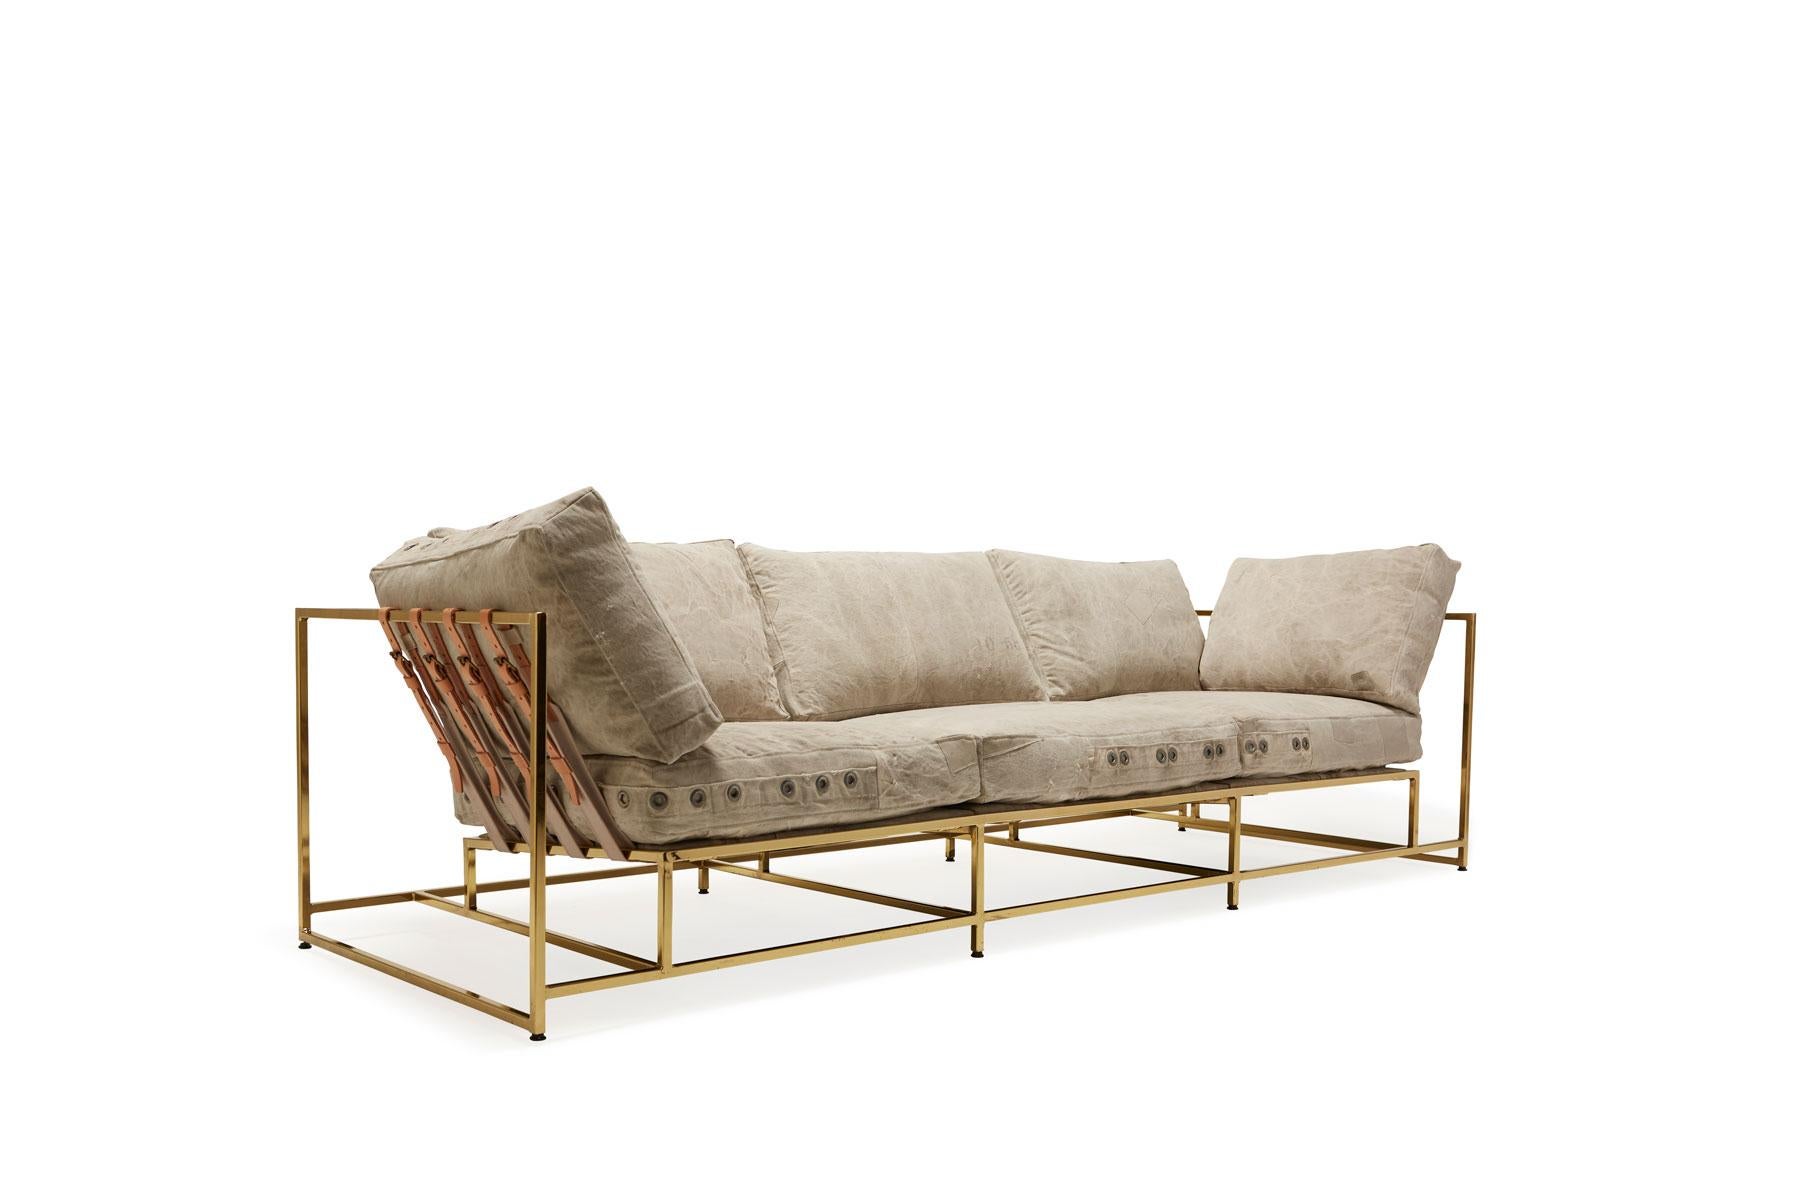 The Inheritance sofa by Stephen Kenn is as comfortable as it is unique. The design features an exposed construction composed of three elements - a steel frame, plush upholstery, and supportive belts. The deep seating area is perfect for a relaxing